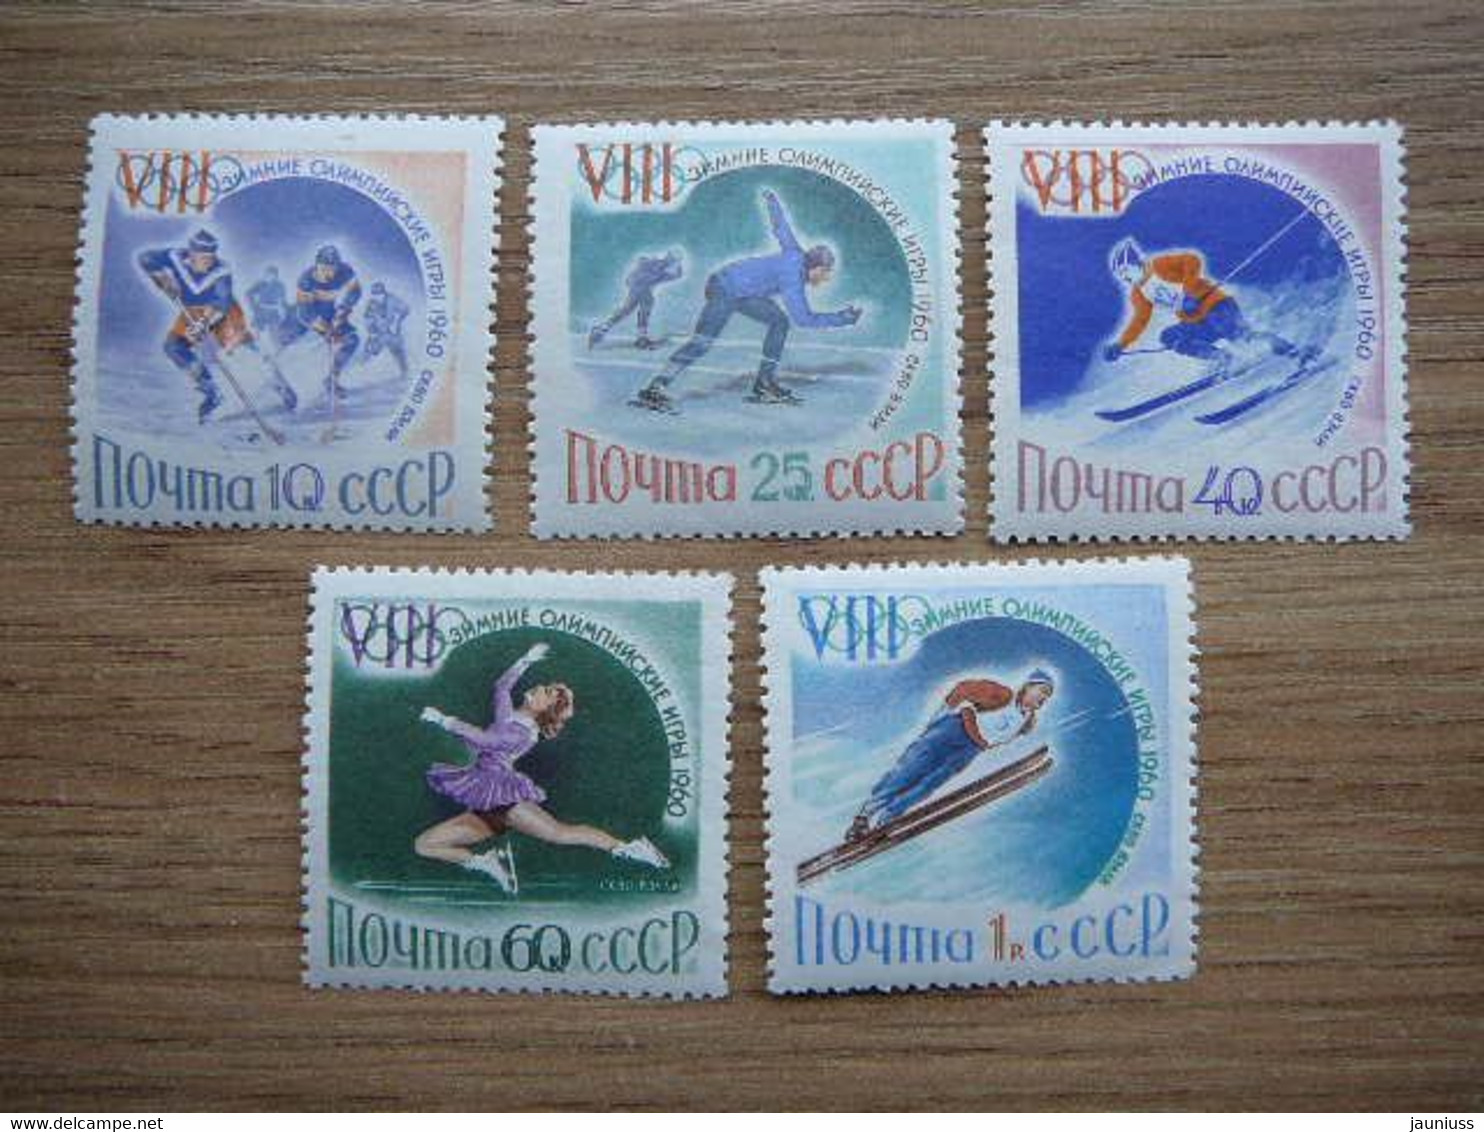 Olympic Games - Winter # Russia USSR Sowjetunion # 1960 MNH # Mi 2317/1 - Hiver 1960: Squaw Valley